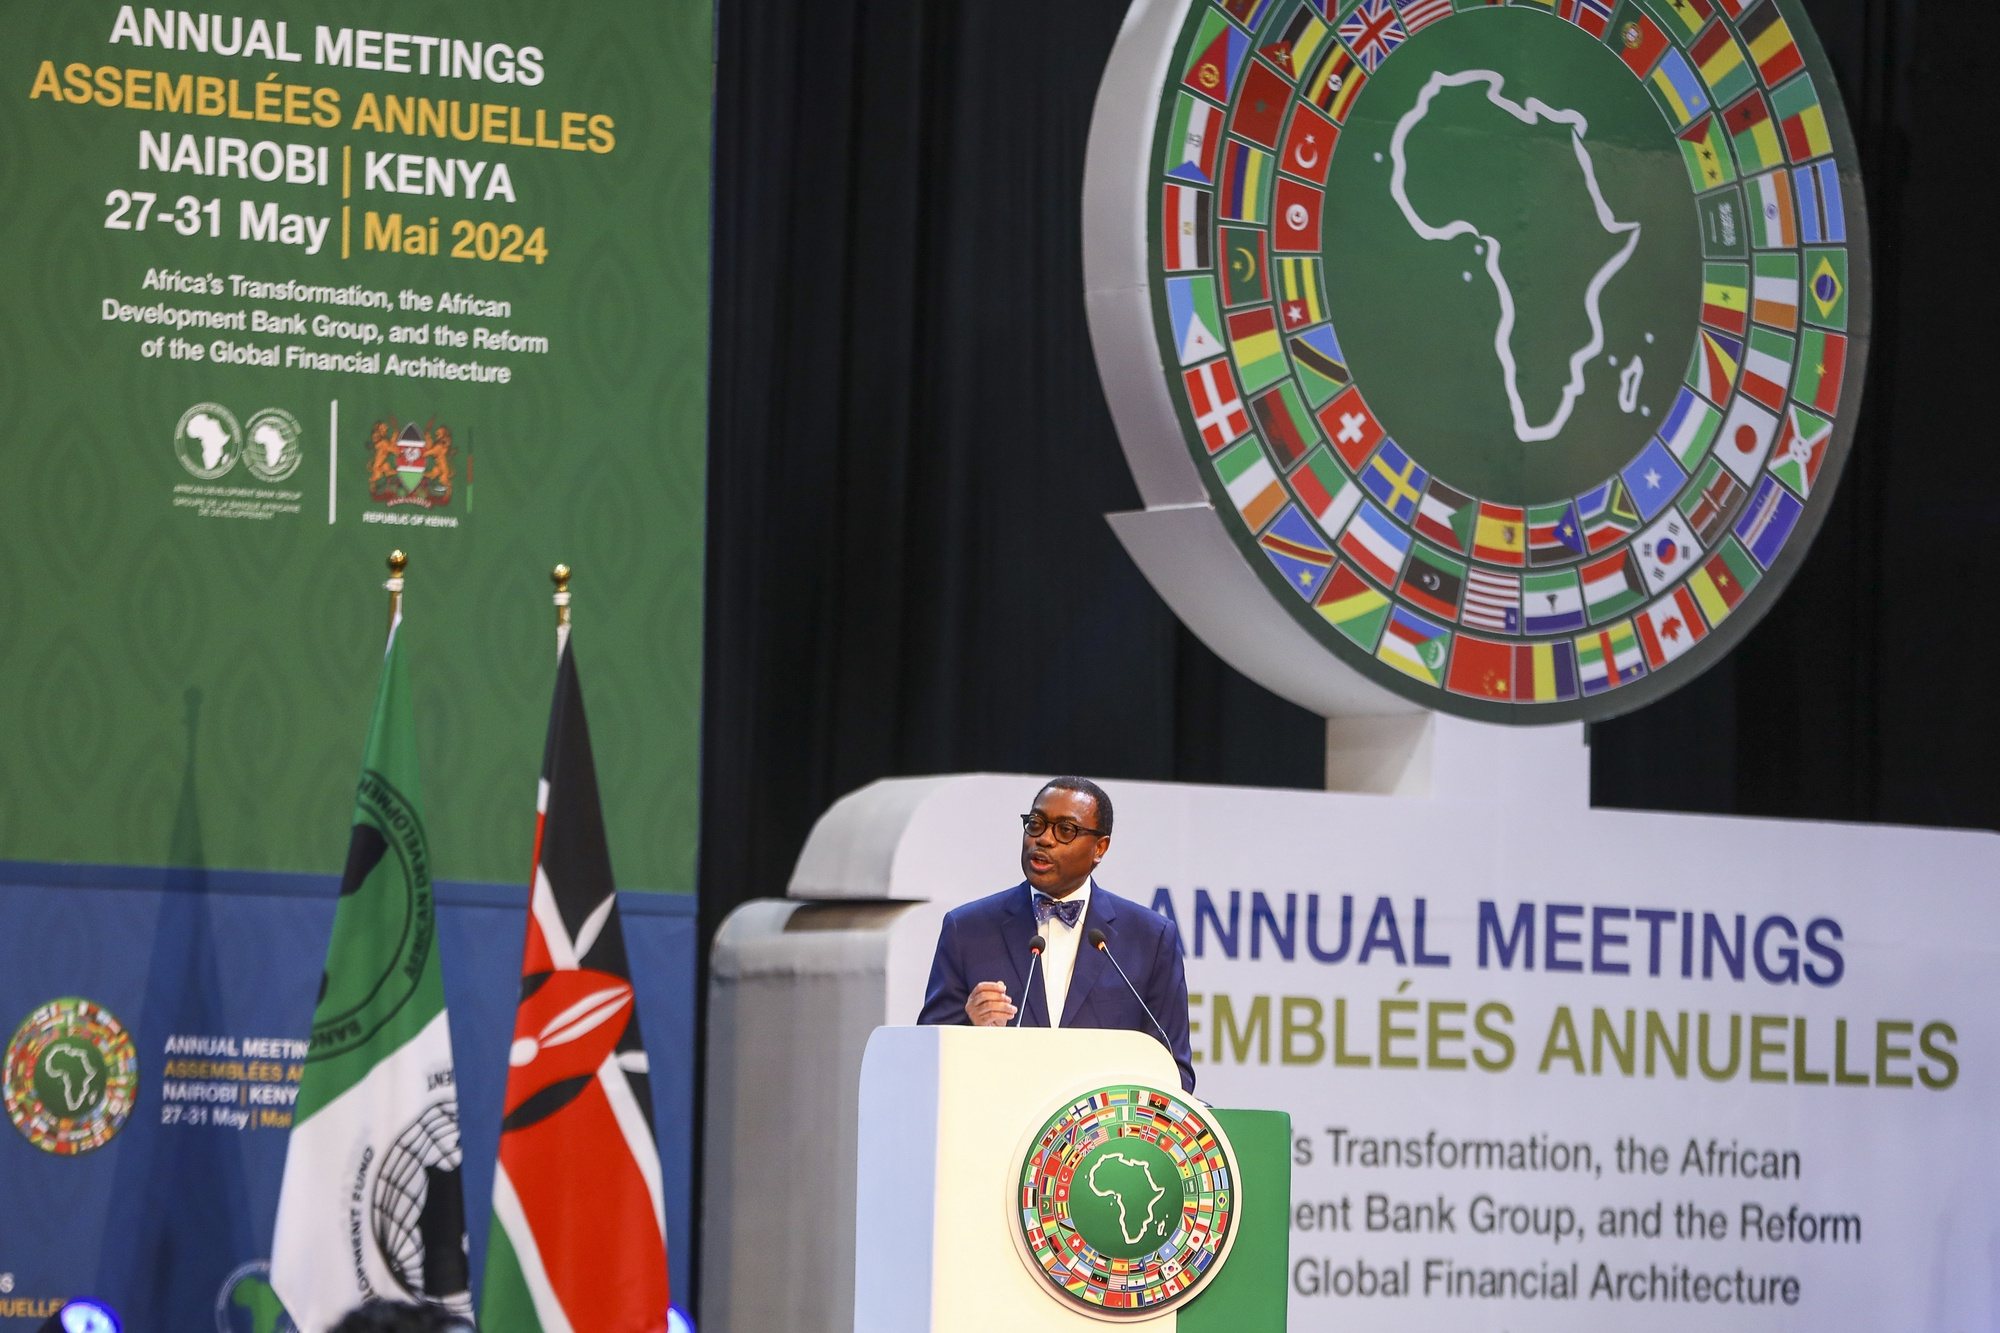 epa11378129 African Development Bank (AFDB) President Akinwumi Adesina (C) speaks during the opening ceremony of the 2024 AFDB Annual Meetings at the Kenyatta International Conference Centre (KICC), in Nairobi, Kenya, 29 May 2024. AFDB is holding Annual Meetings in Nairobi from 27 to 31 May 2024. They comprise the 59th Annual Assembly of the African Development Bank and the 50th meeting of the African Development Fund. Up to 3,000 delegates, including African heads of state, ministers and central bank governors among those gathered at the event to discuss the theme “Africa’s Transformation, the African Development Bank Group, and the Reform of the Global Financial Architecture”.  EPA/Daniel Irungu